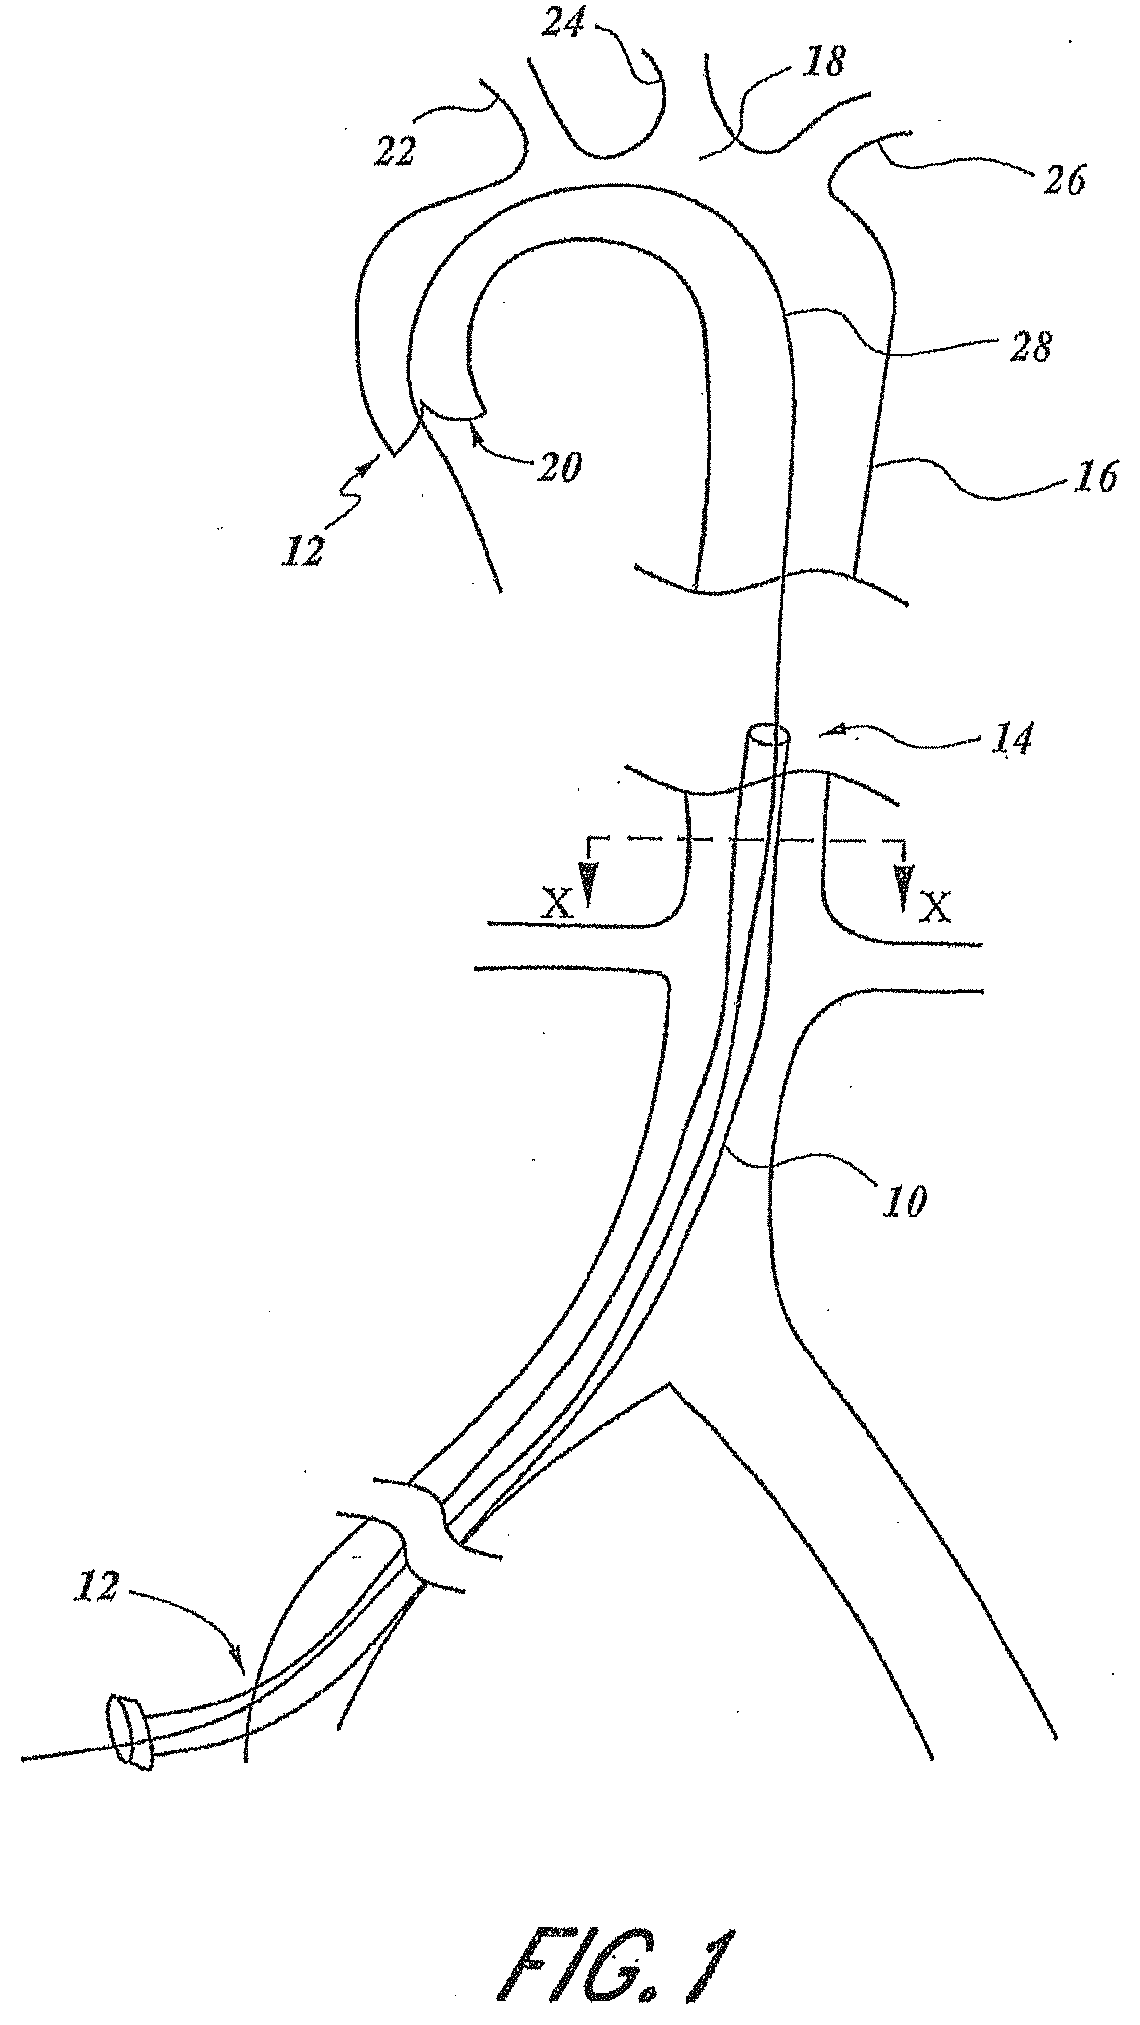 Embolic protection and access system